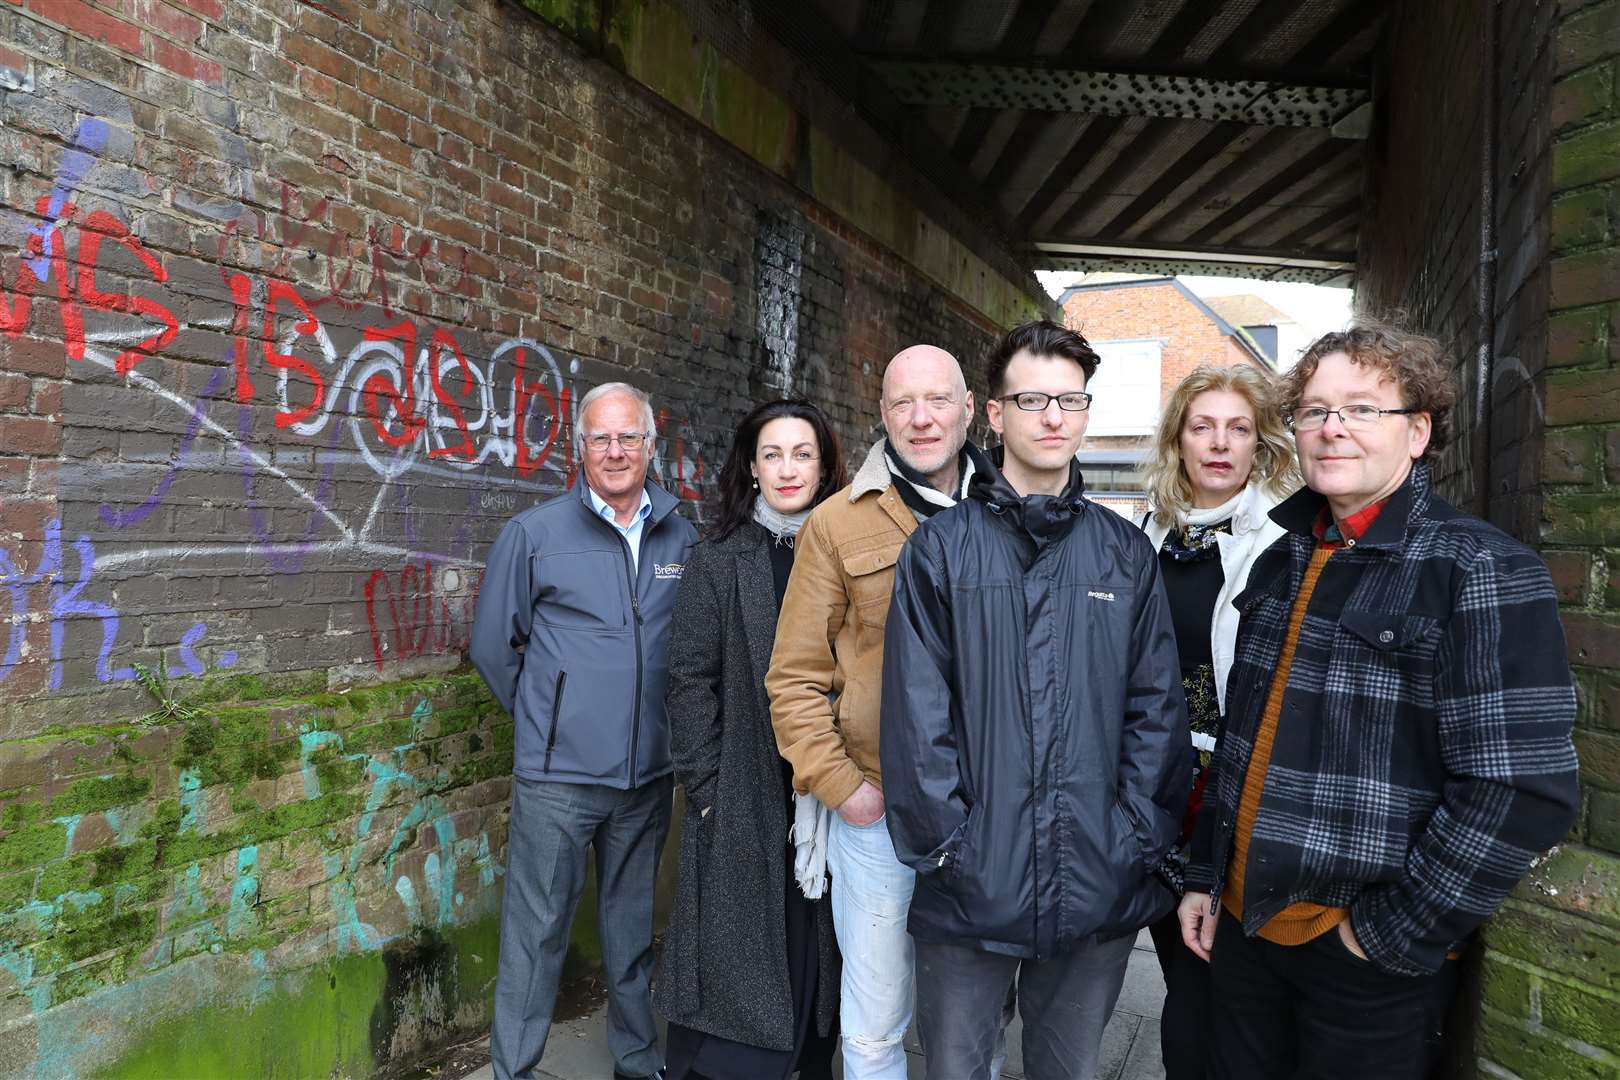 The Colourful Canterbury Community Art Project group is planning to paint over graffiti on Wincheap railway bridge with eye-catching artwork